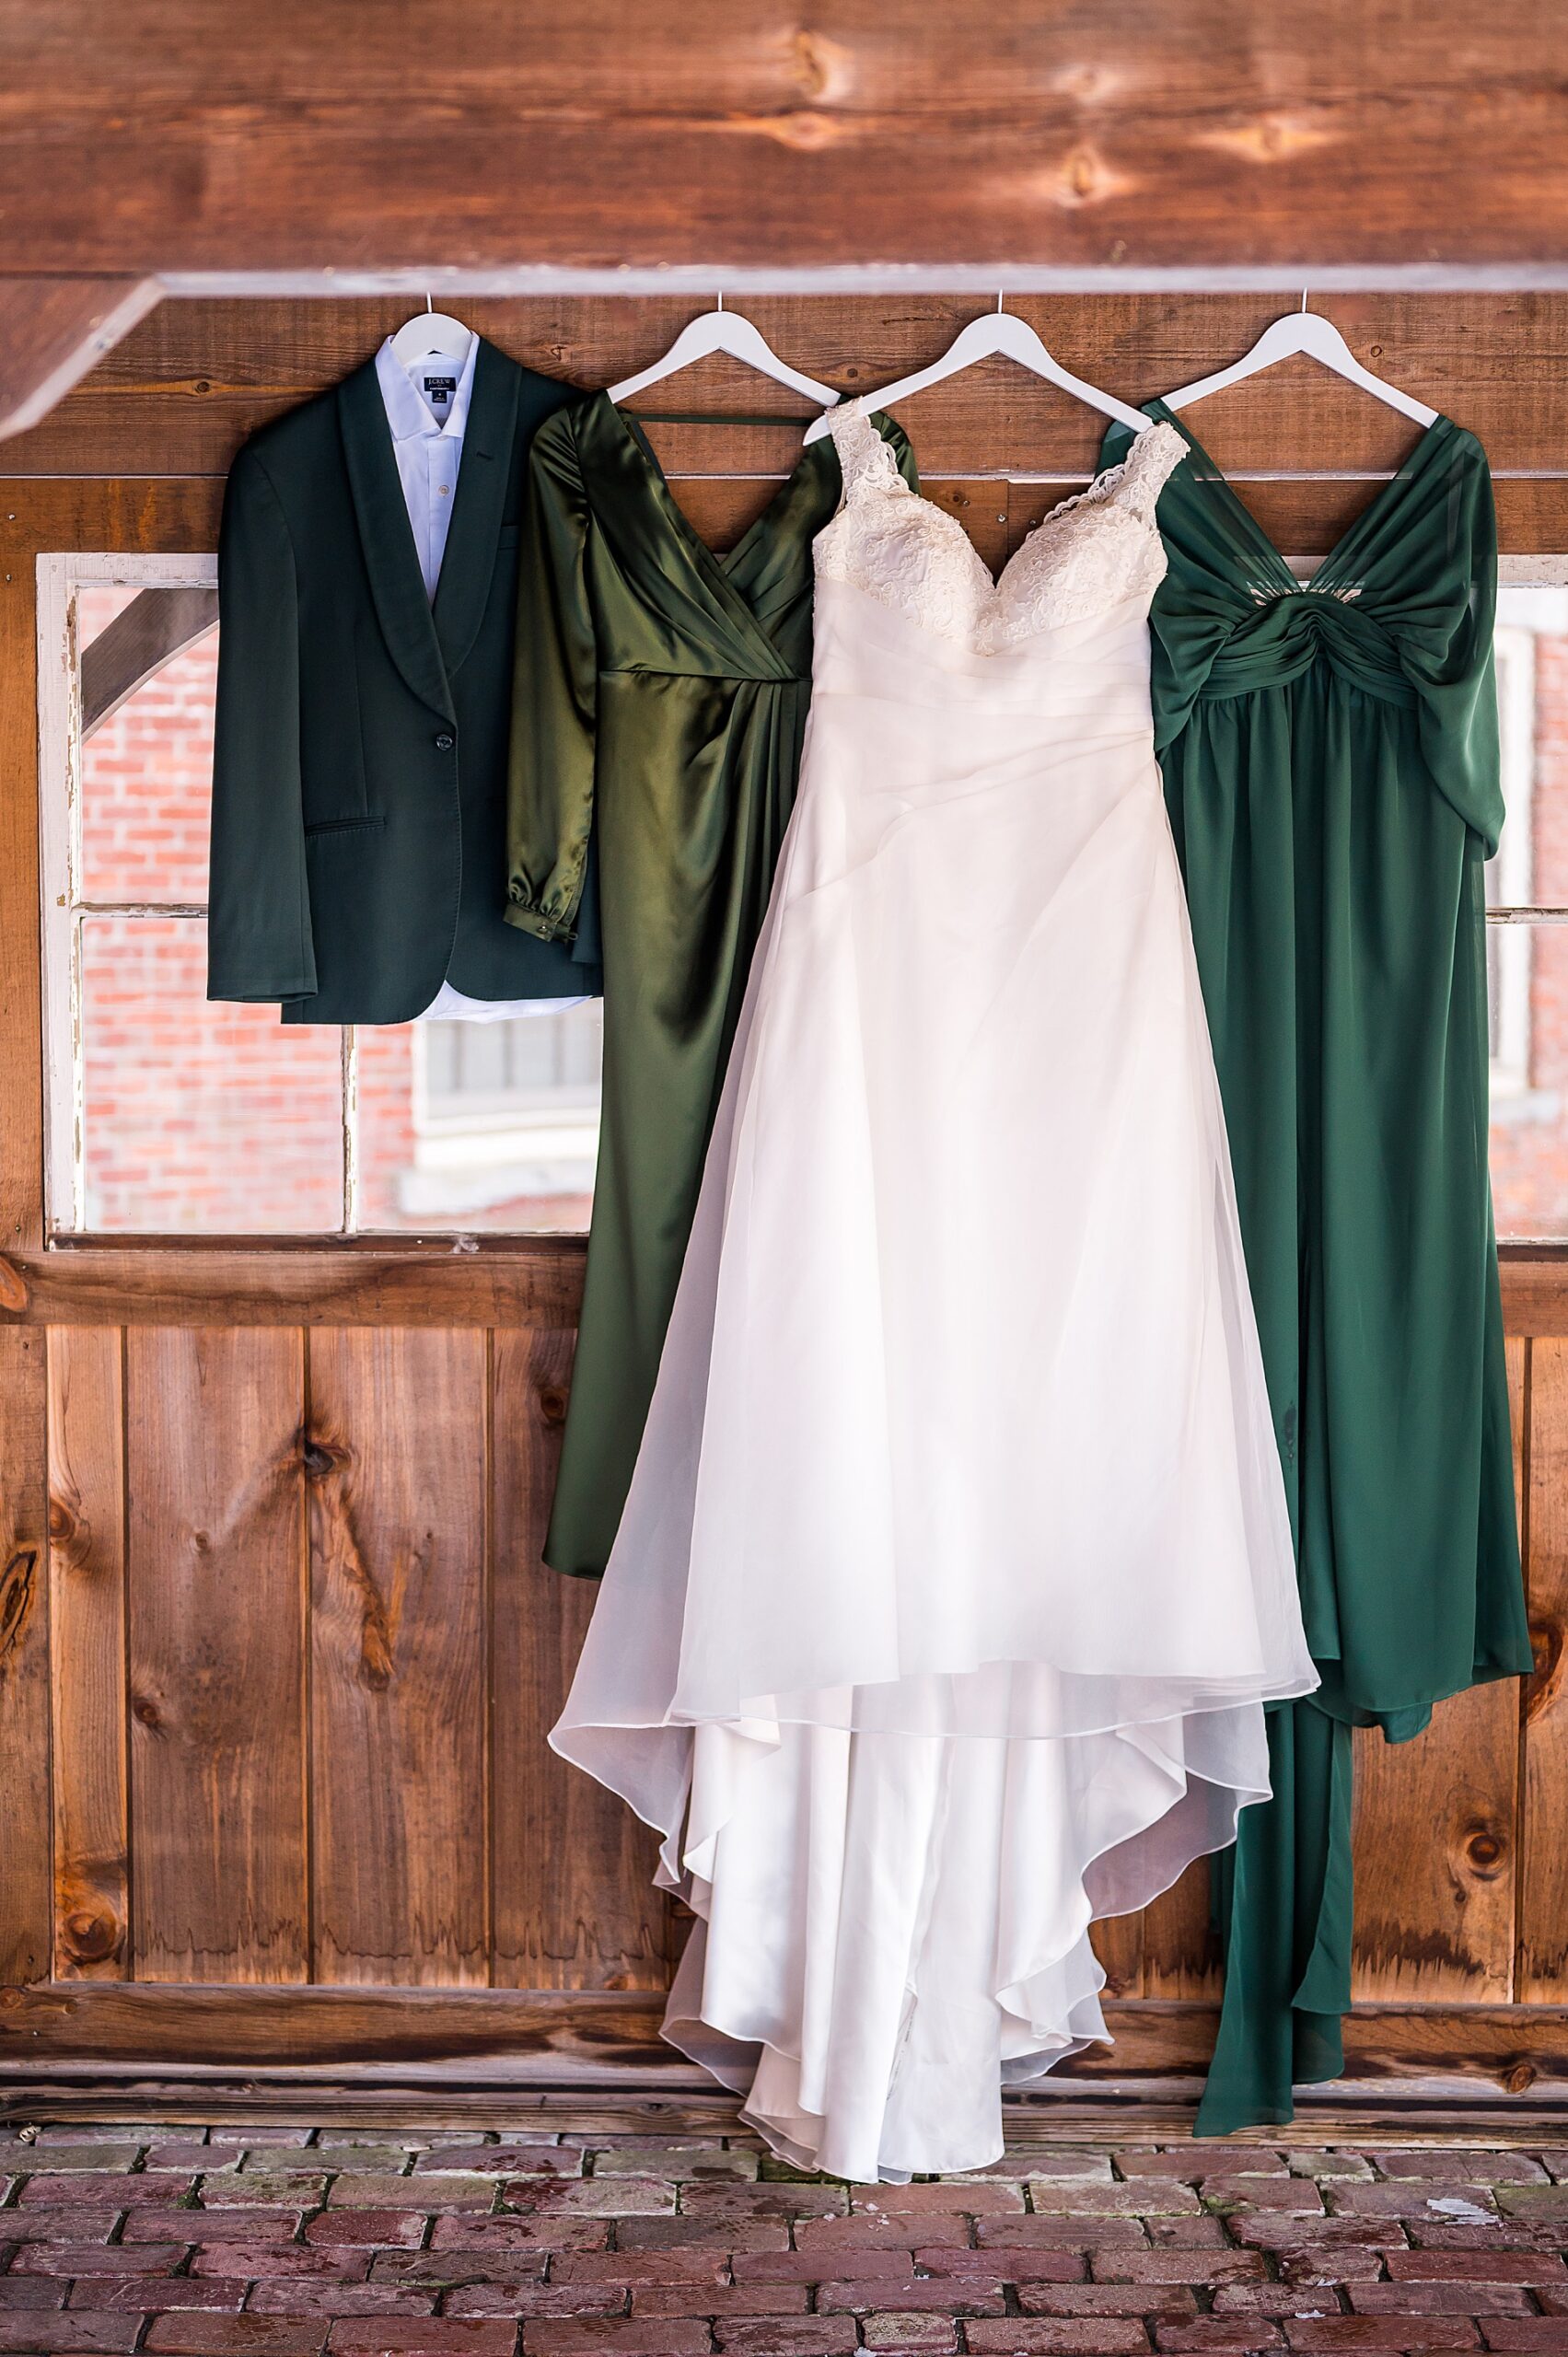 wedding dress and attire from Claremont New Hampshire Wedding at The Common Man Inn